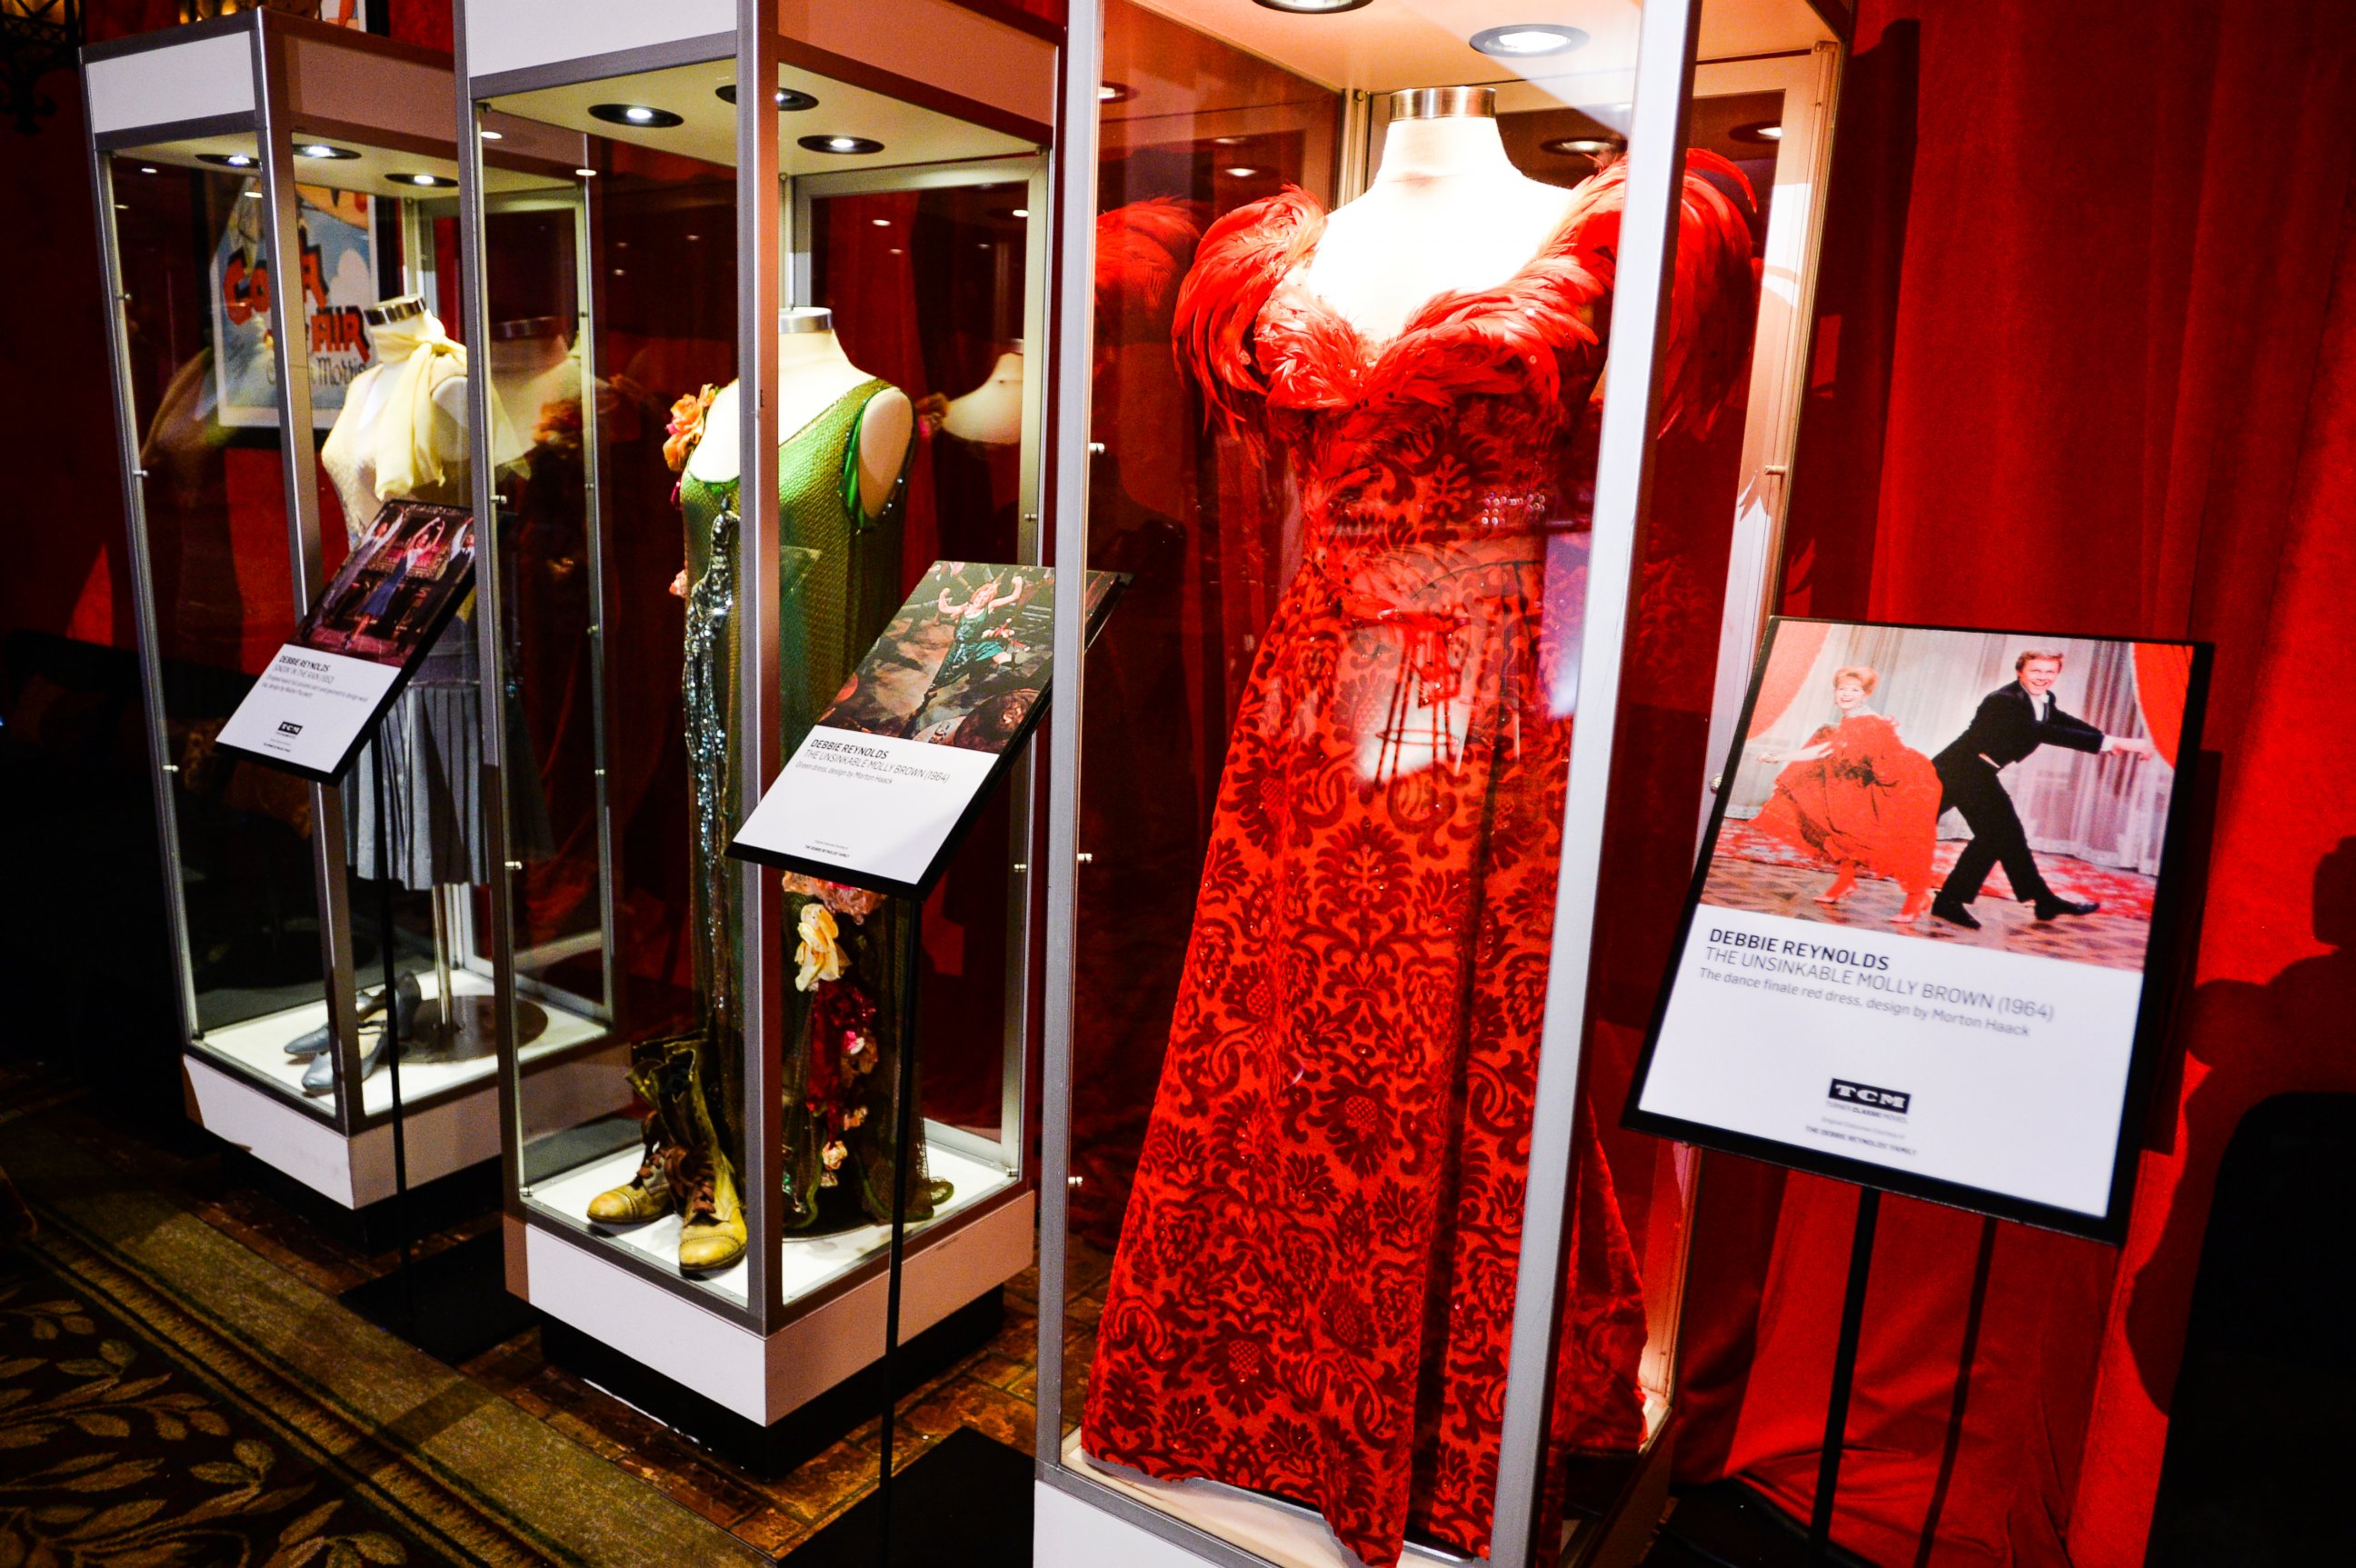 PHOTO: Debbie Reynolds Exhibit in Club TCM at the Hollywood Roosevelt during the 2017 TCM Classic Film Festival in Hollywood, Calif.